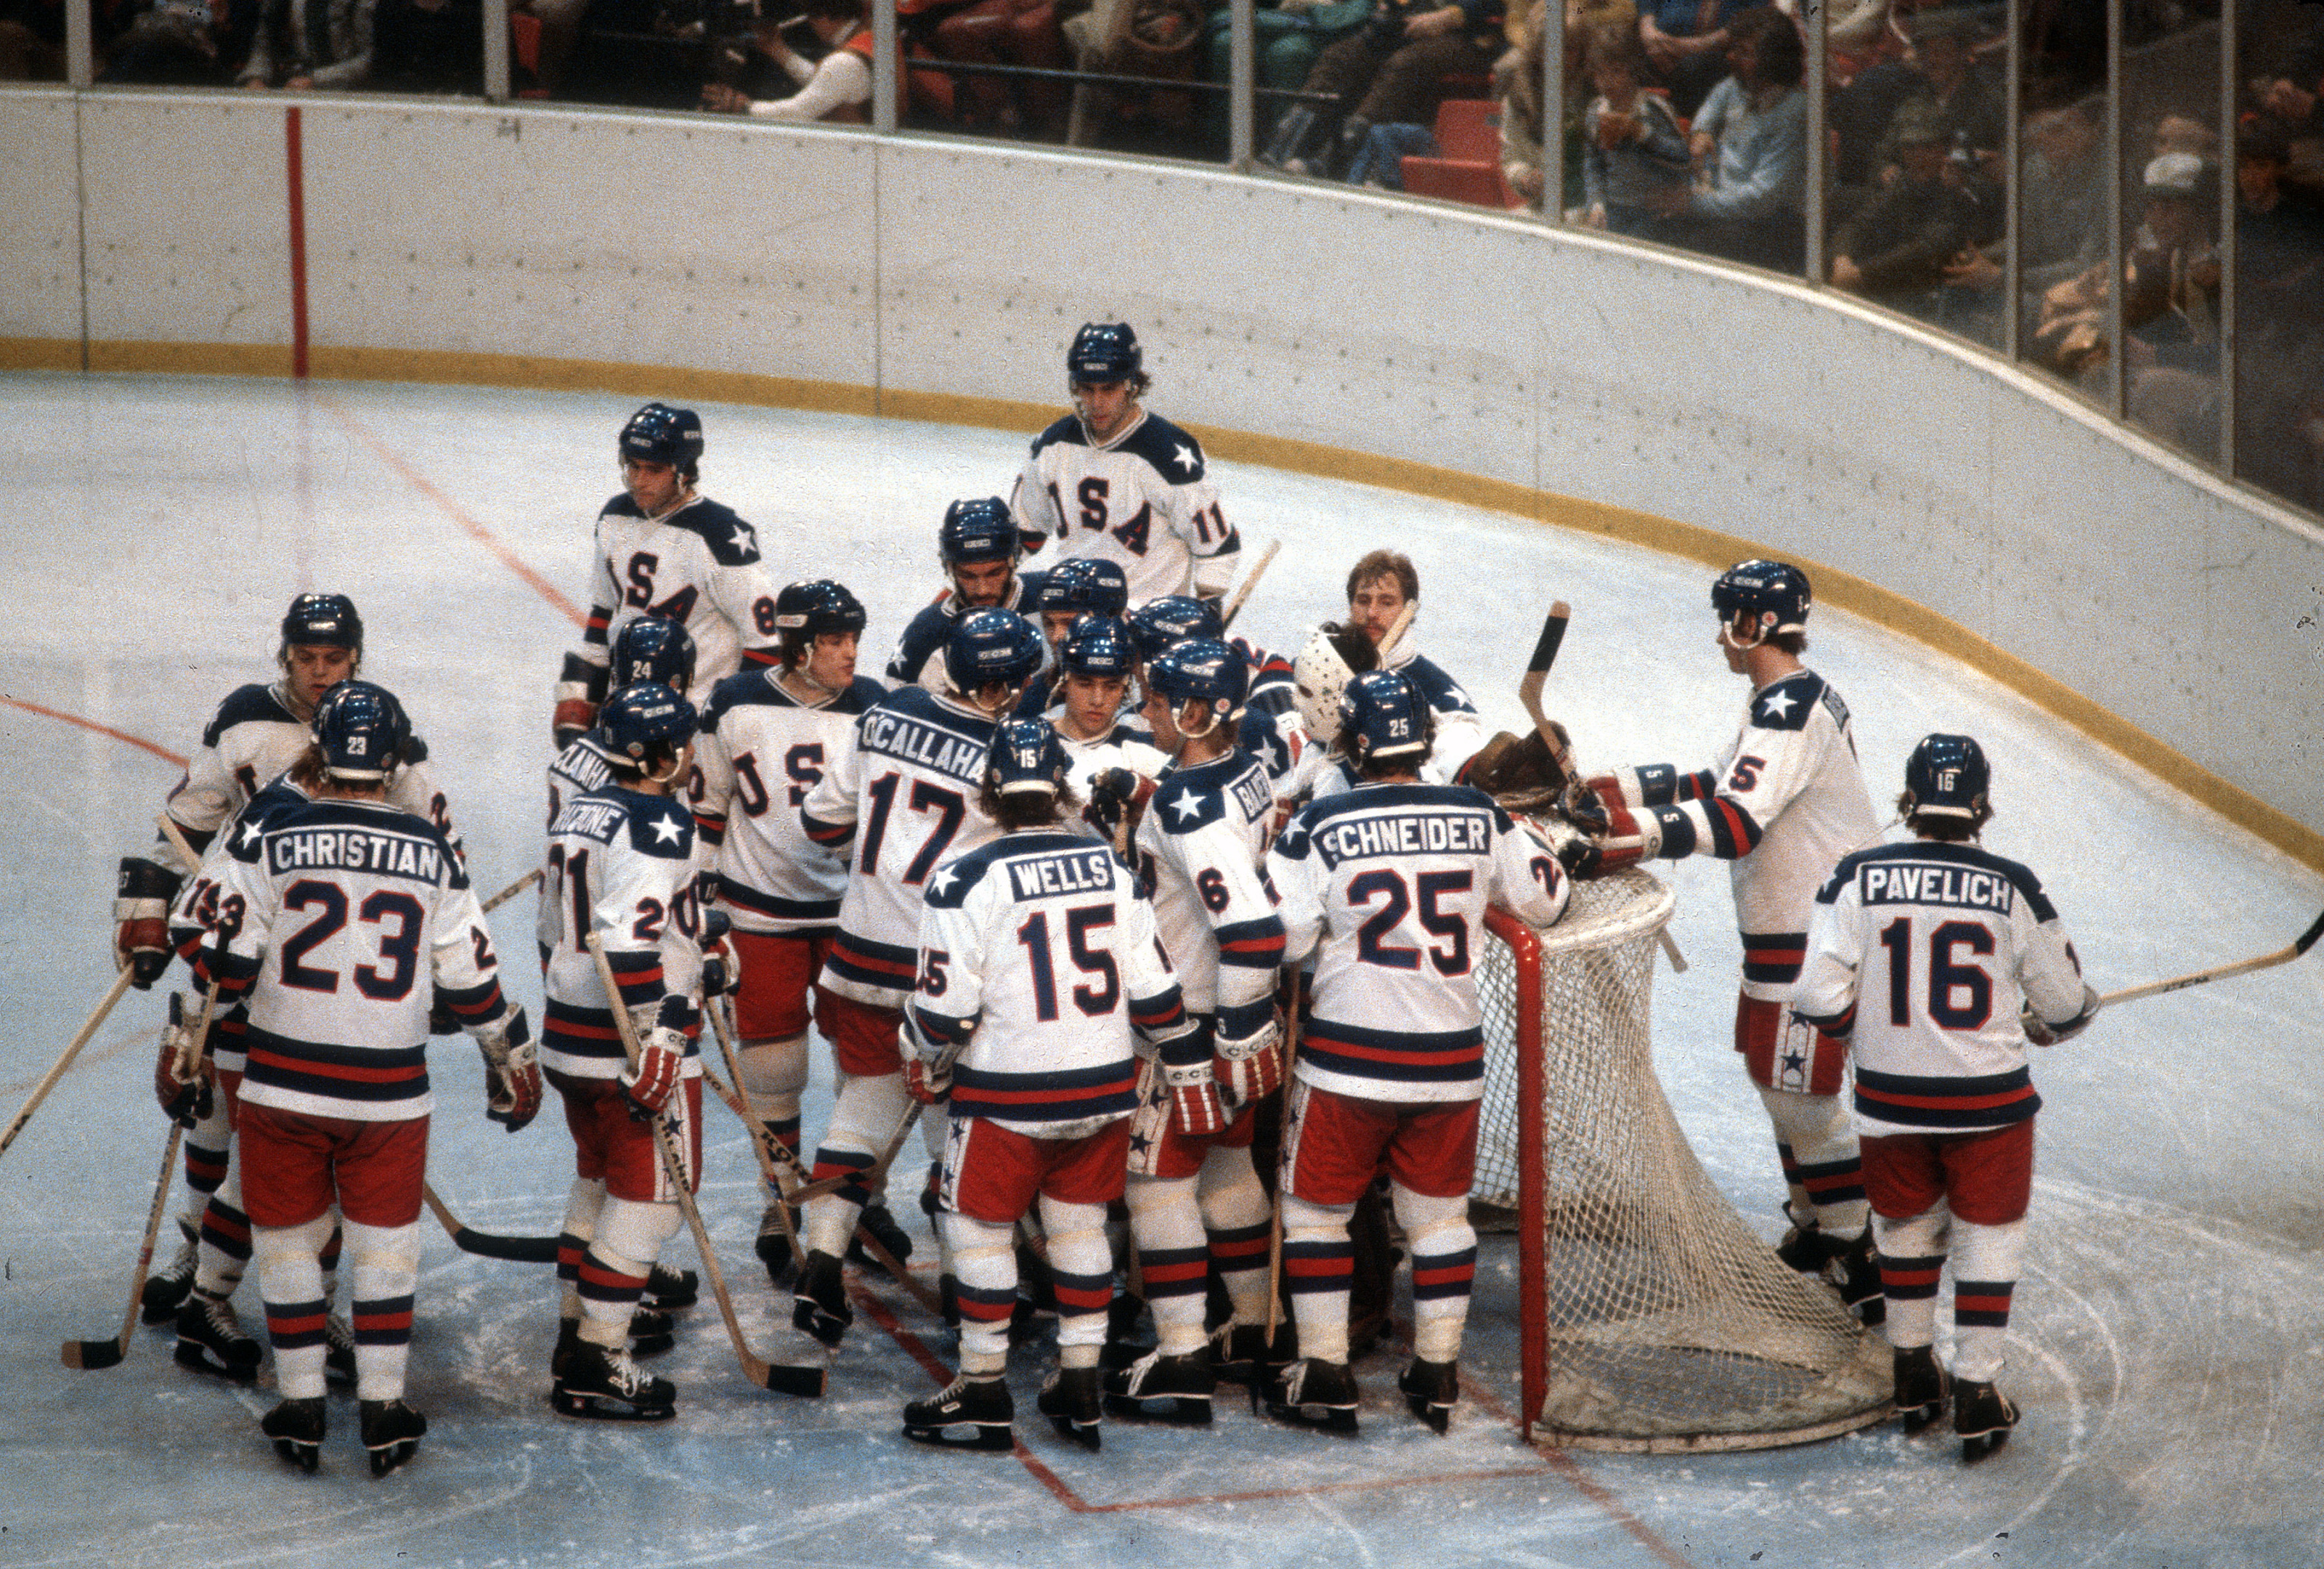 The 1980 Miracle on Ice: The game 